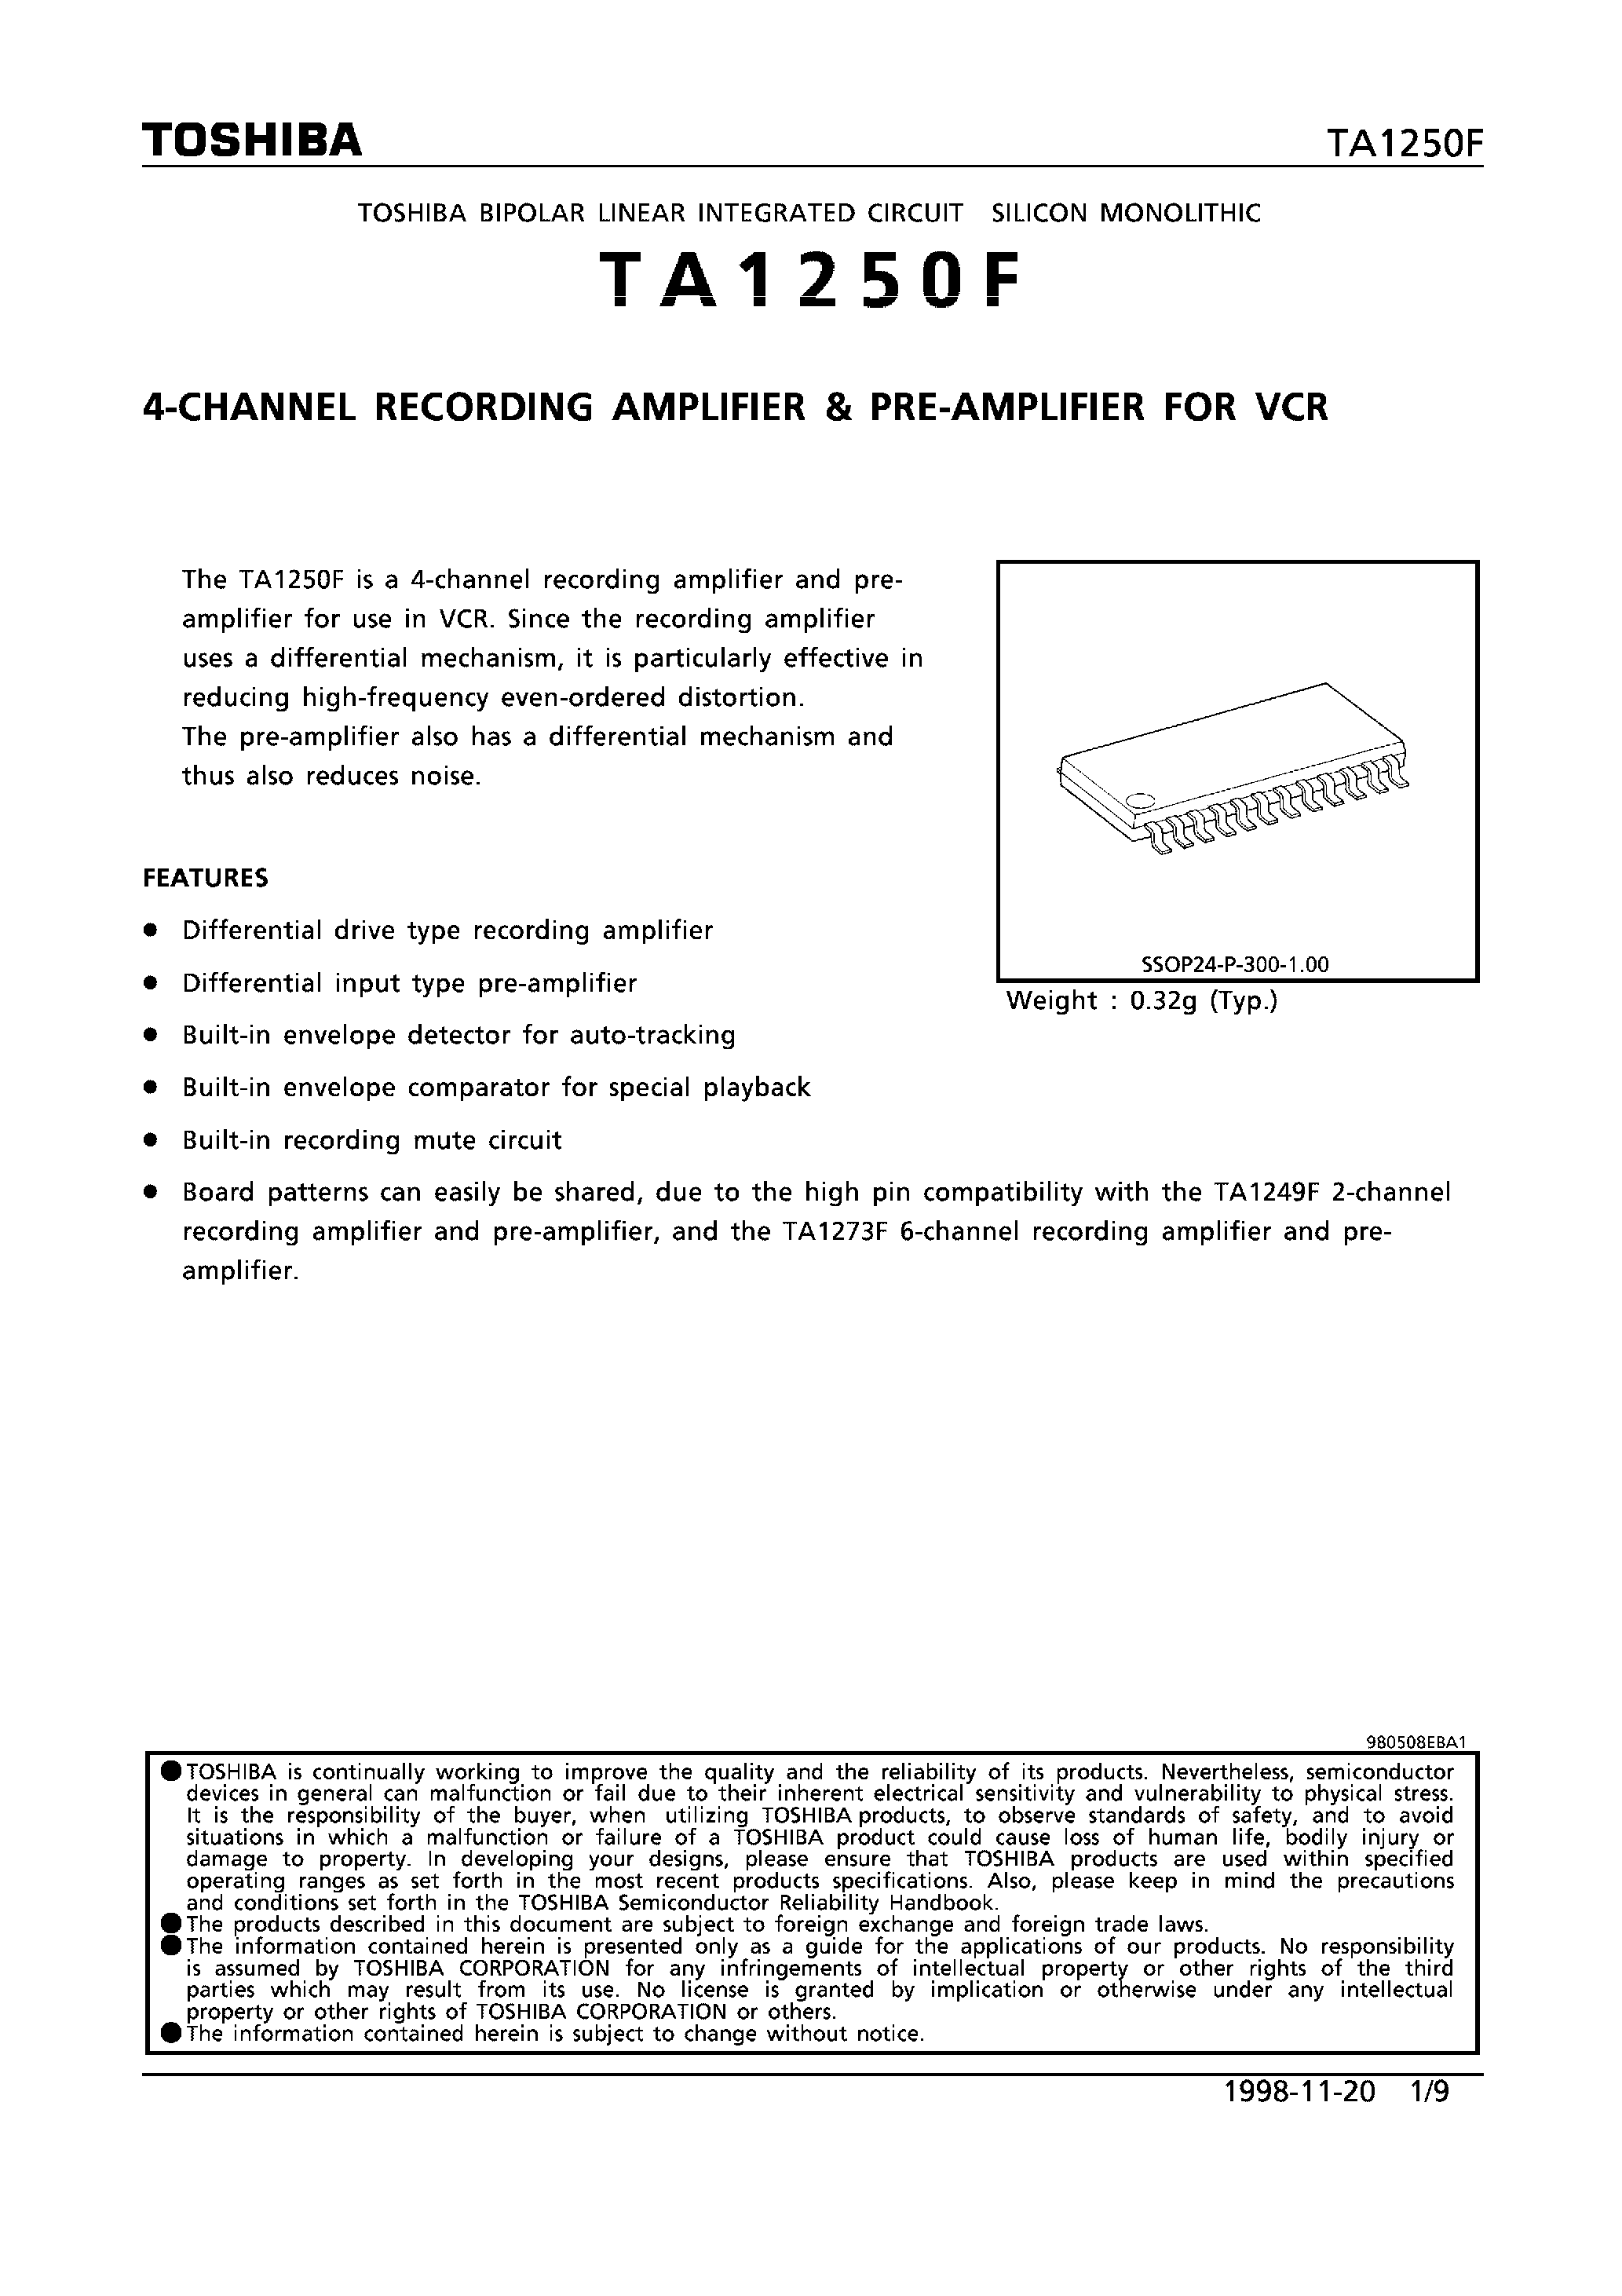 Datasheet TA1250F - 4-CHANNEL RECORDING AMPLIFIER & PRE-AMPLIFIER FOR VCR page 1